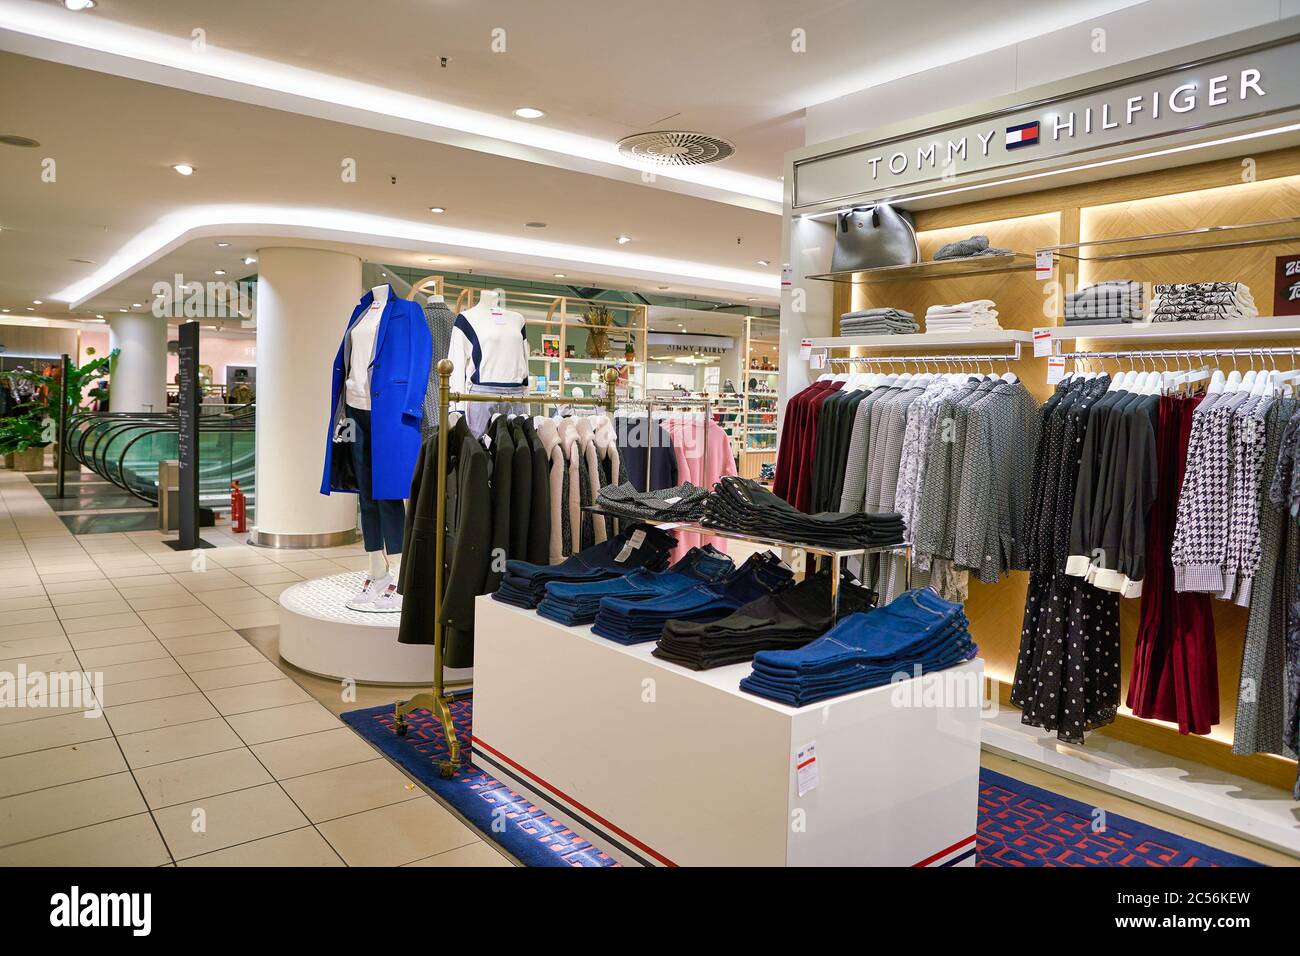 BERLIN, GERMANY - CIRCA 2019: Tommy Hilfiger clothes on display at the Kaufhaus des Westens (KaDeWe) department store in Berlin Stock Photo - Alamy